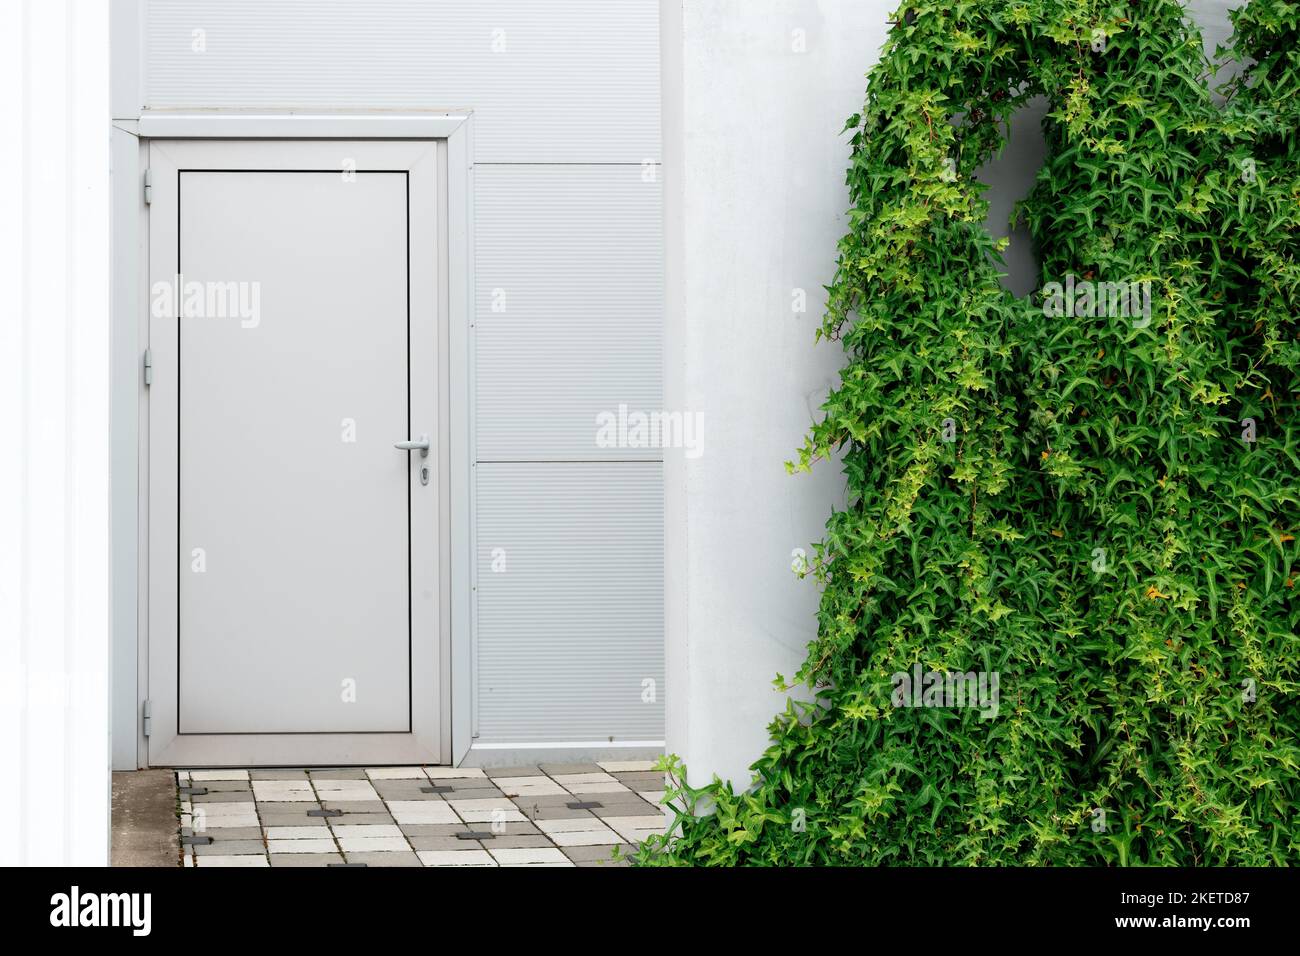 Common ivy creeping plant growing against the wall of industrial building with back door Stock Photo